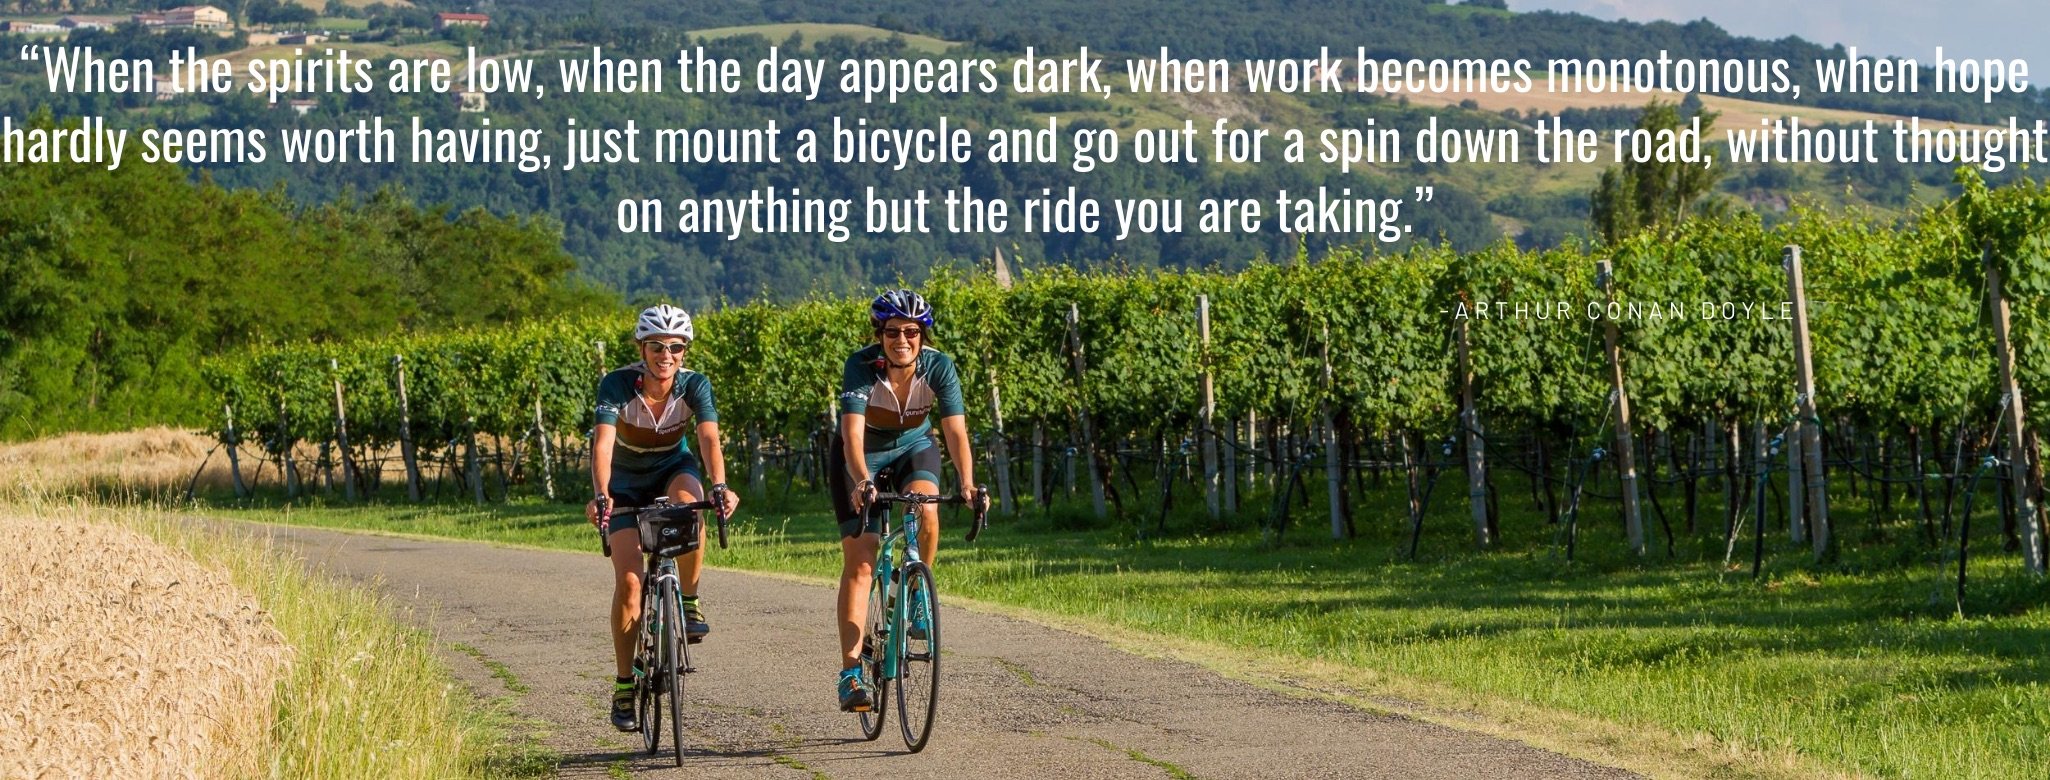 Cycling Quotes Conan Doyle Revised